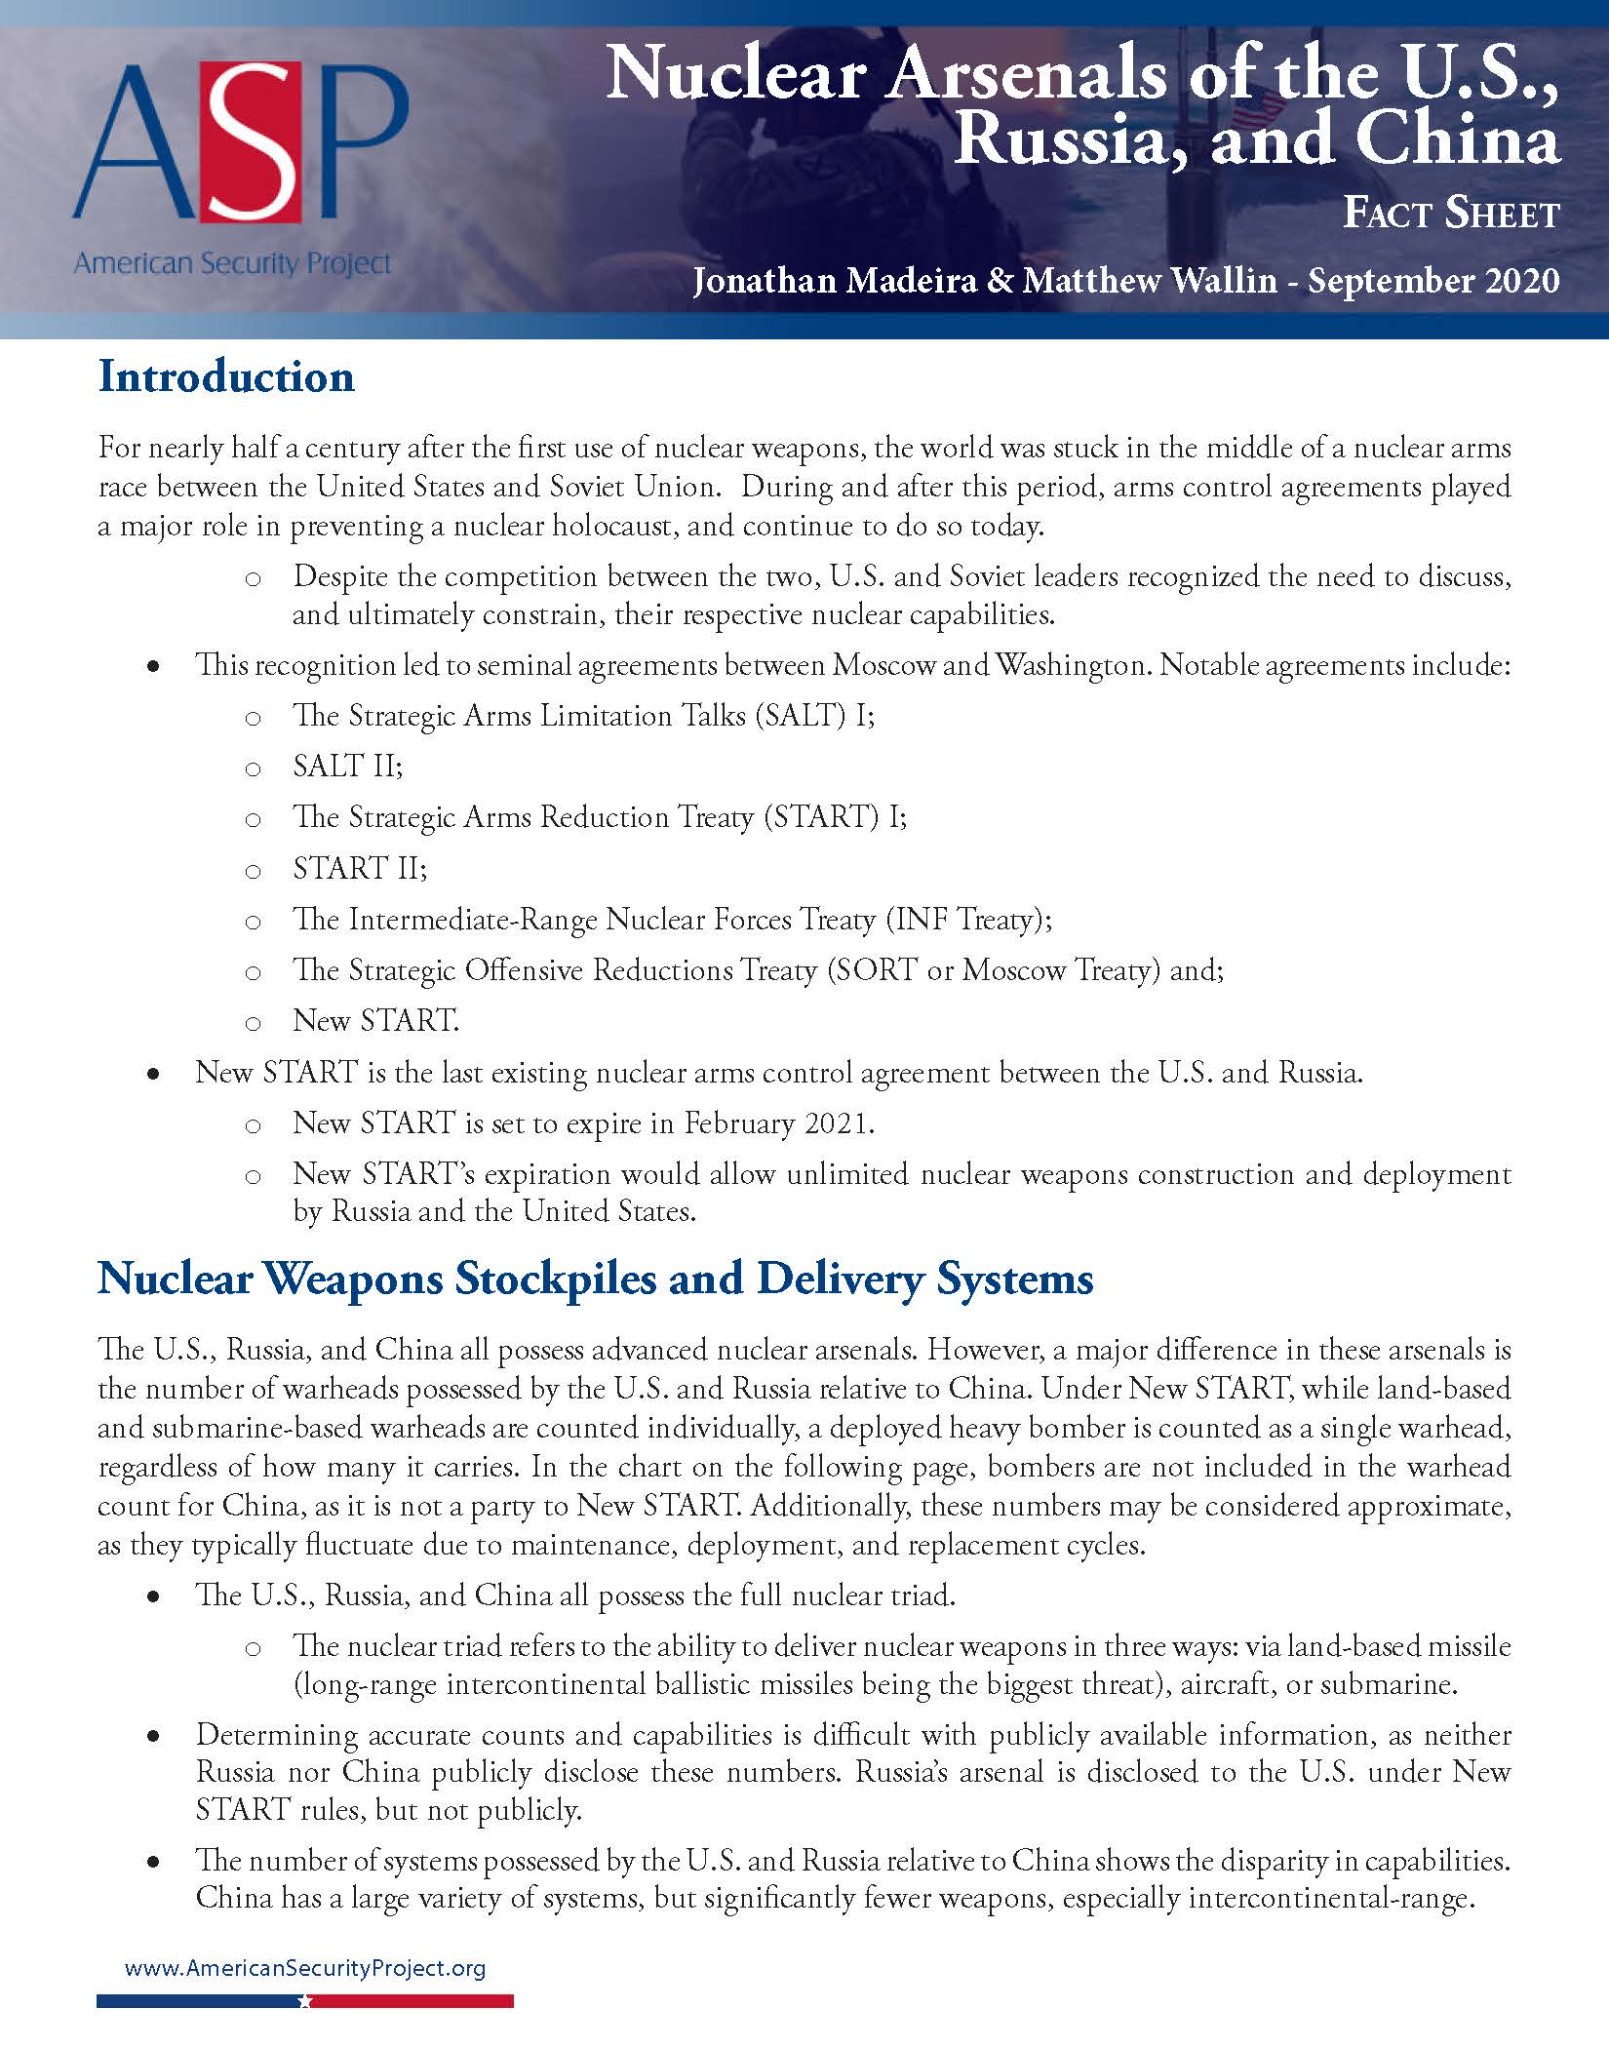 Fact Sheet – Nuclear Arsenals of the U.S., Russia, and China